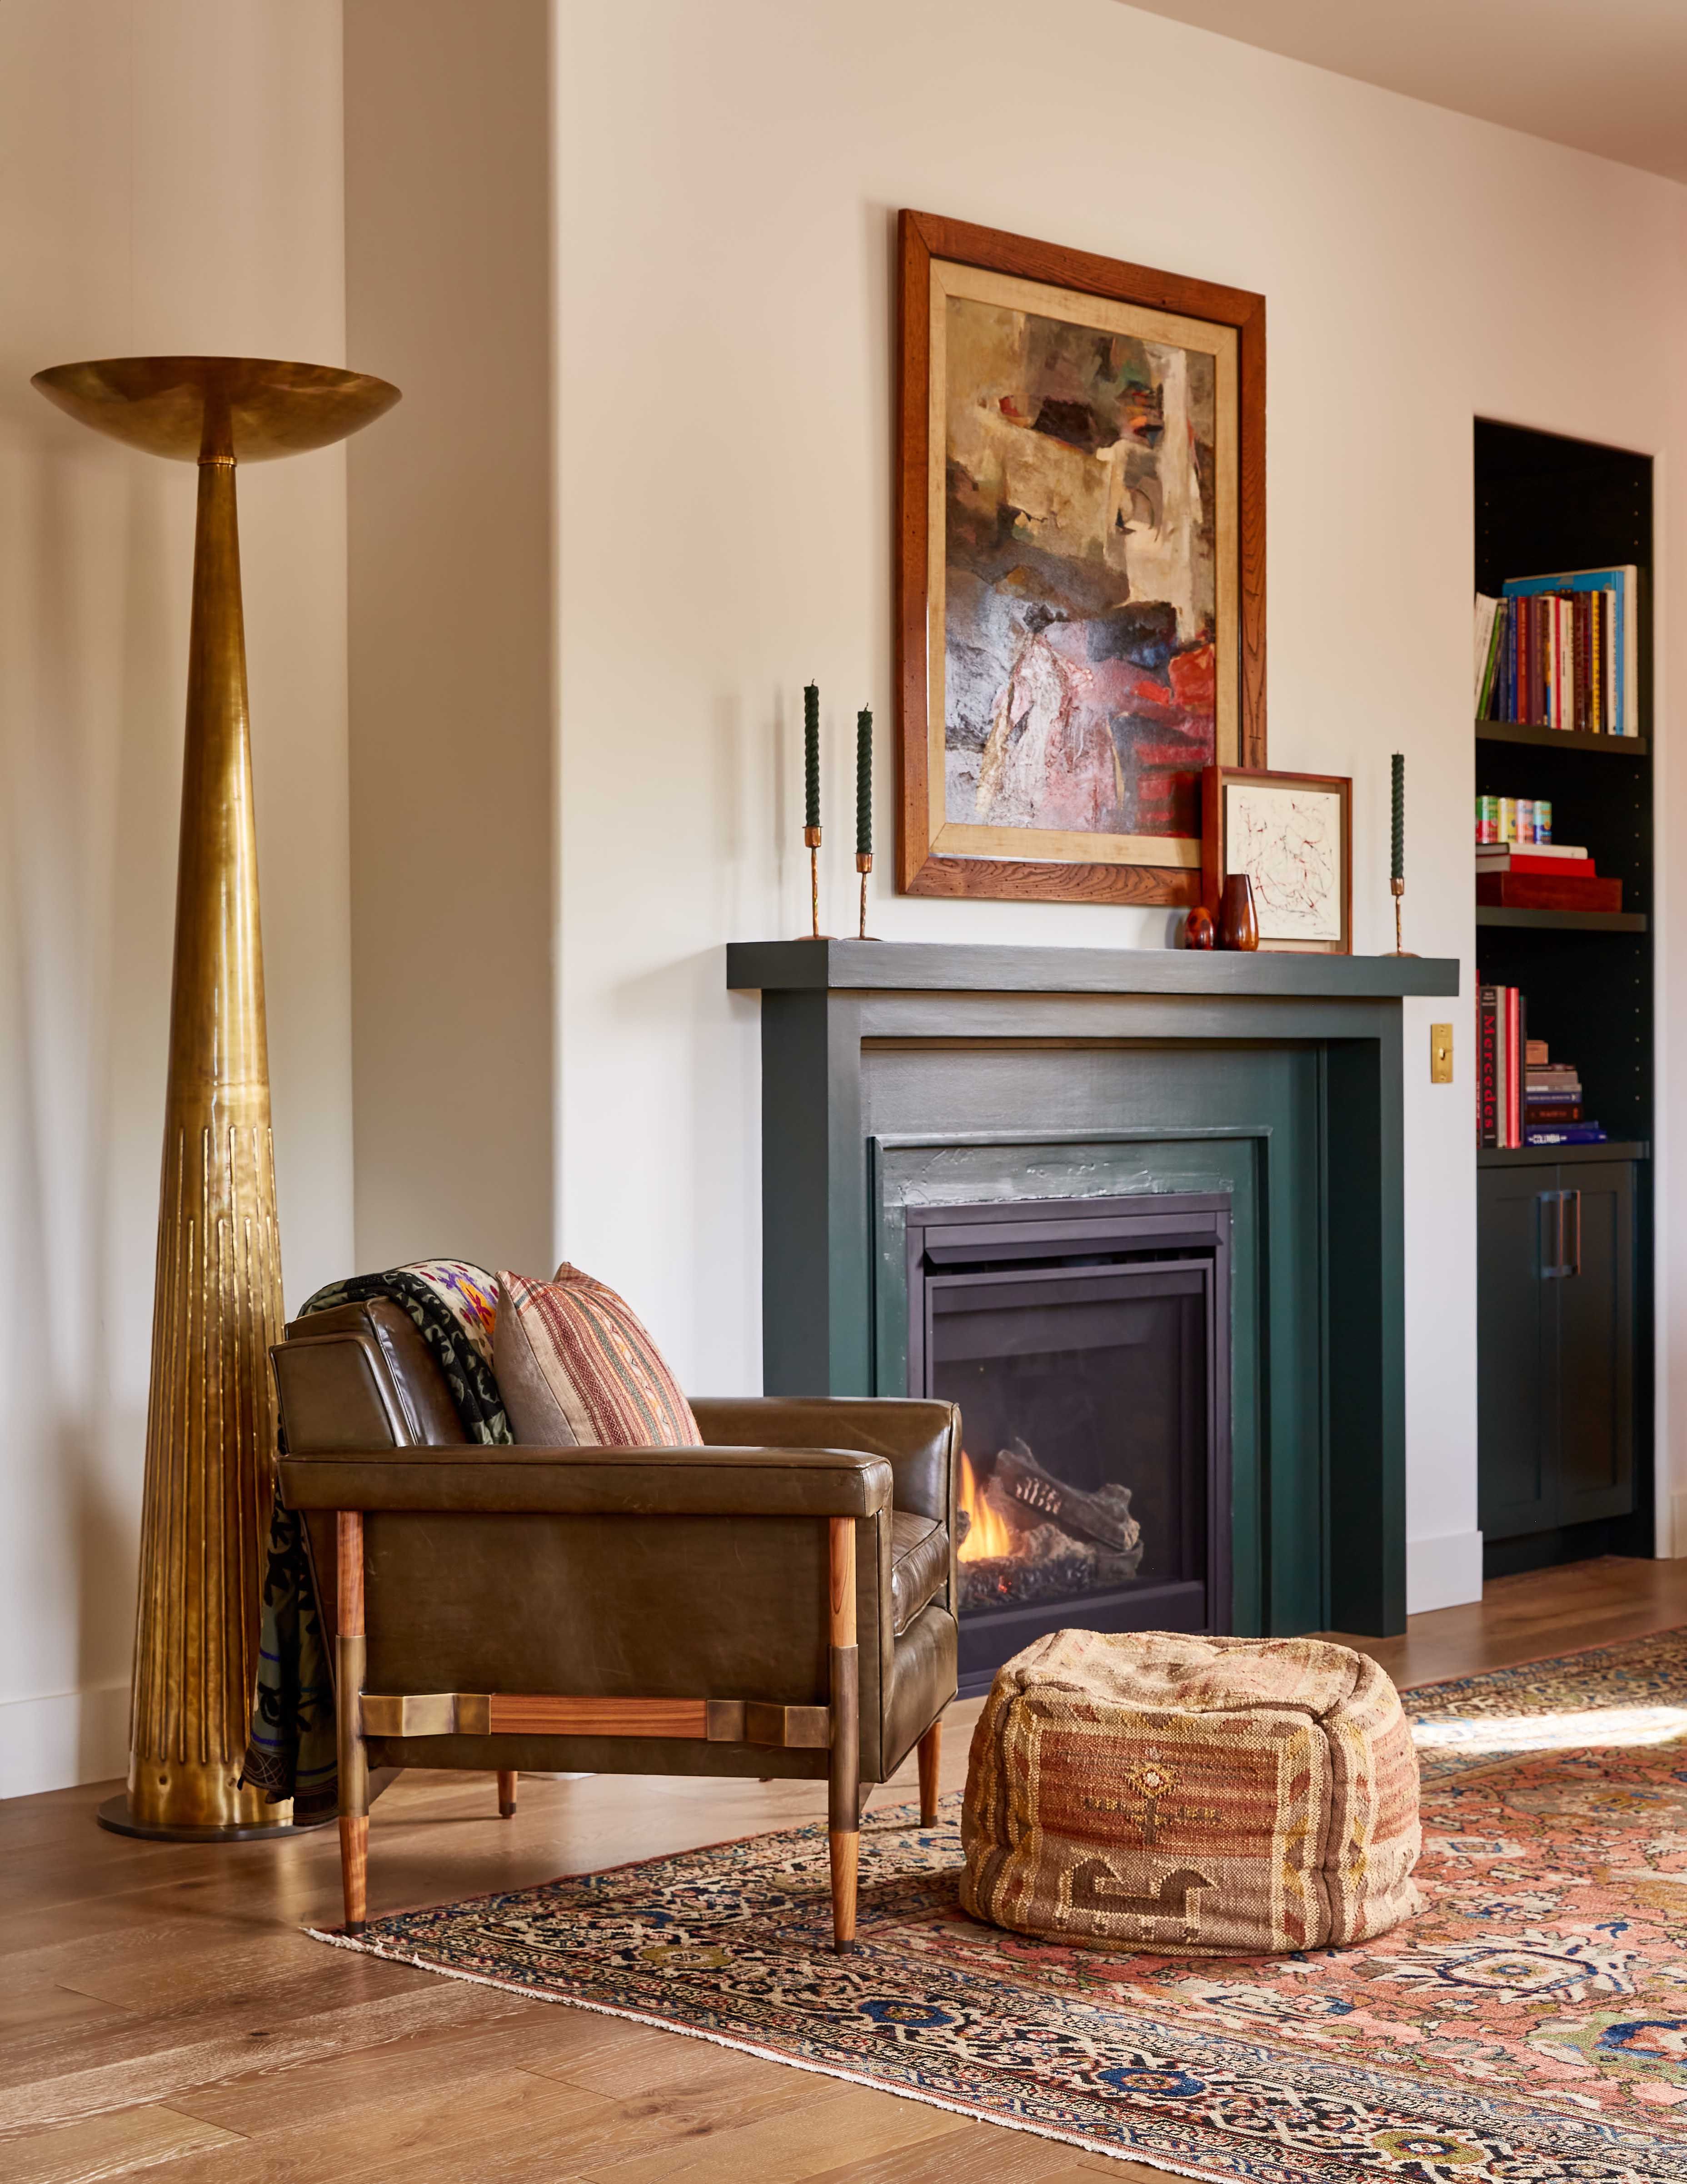 7 Fireplace Paint Colors to Keep the Room Cozy